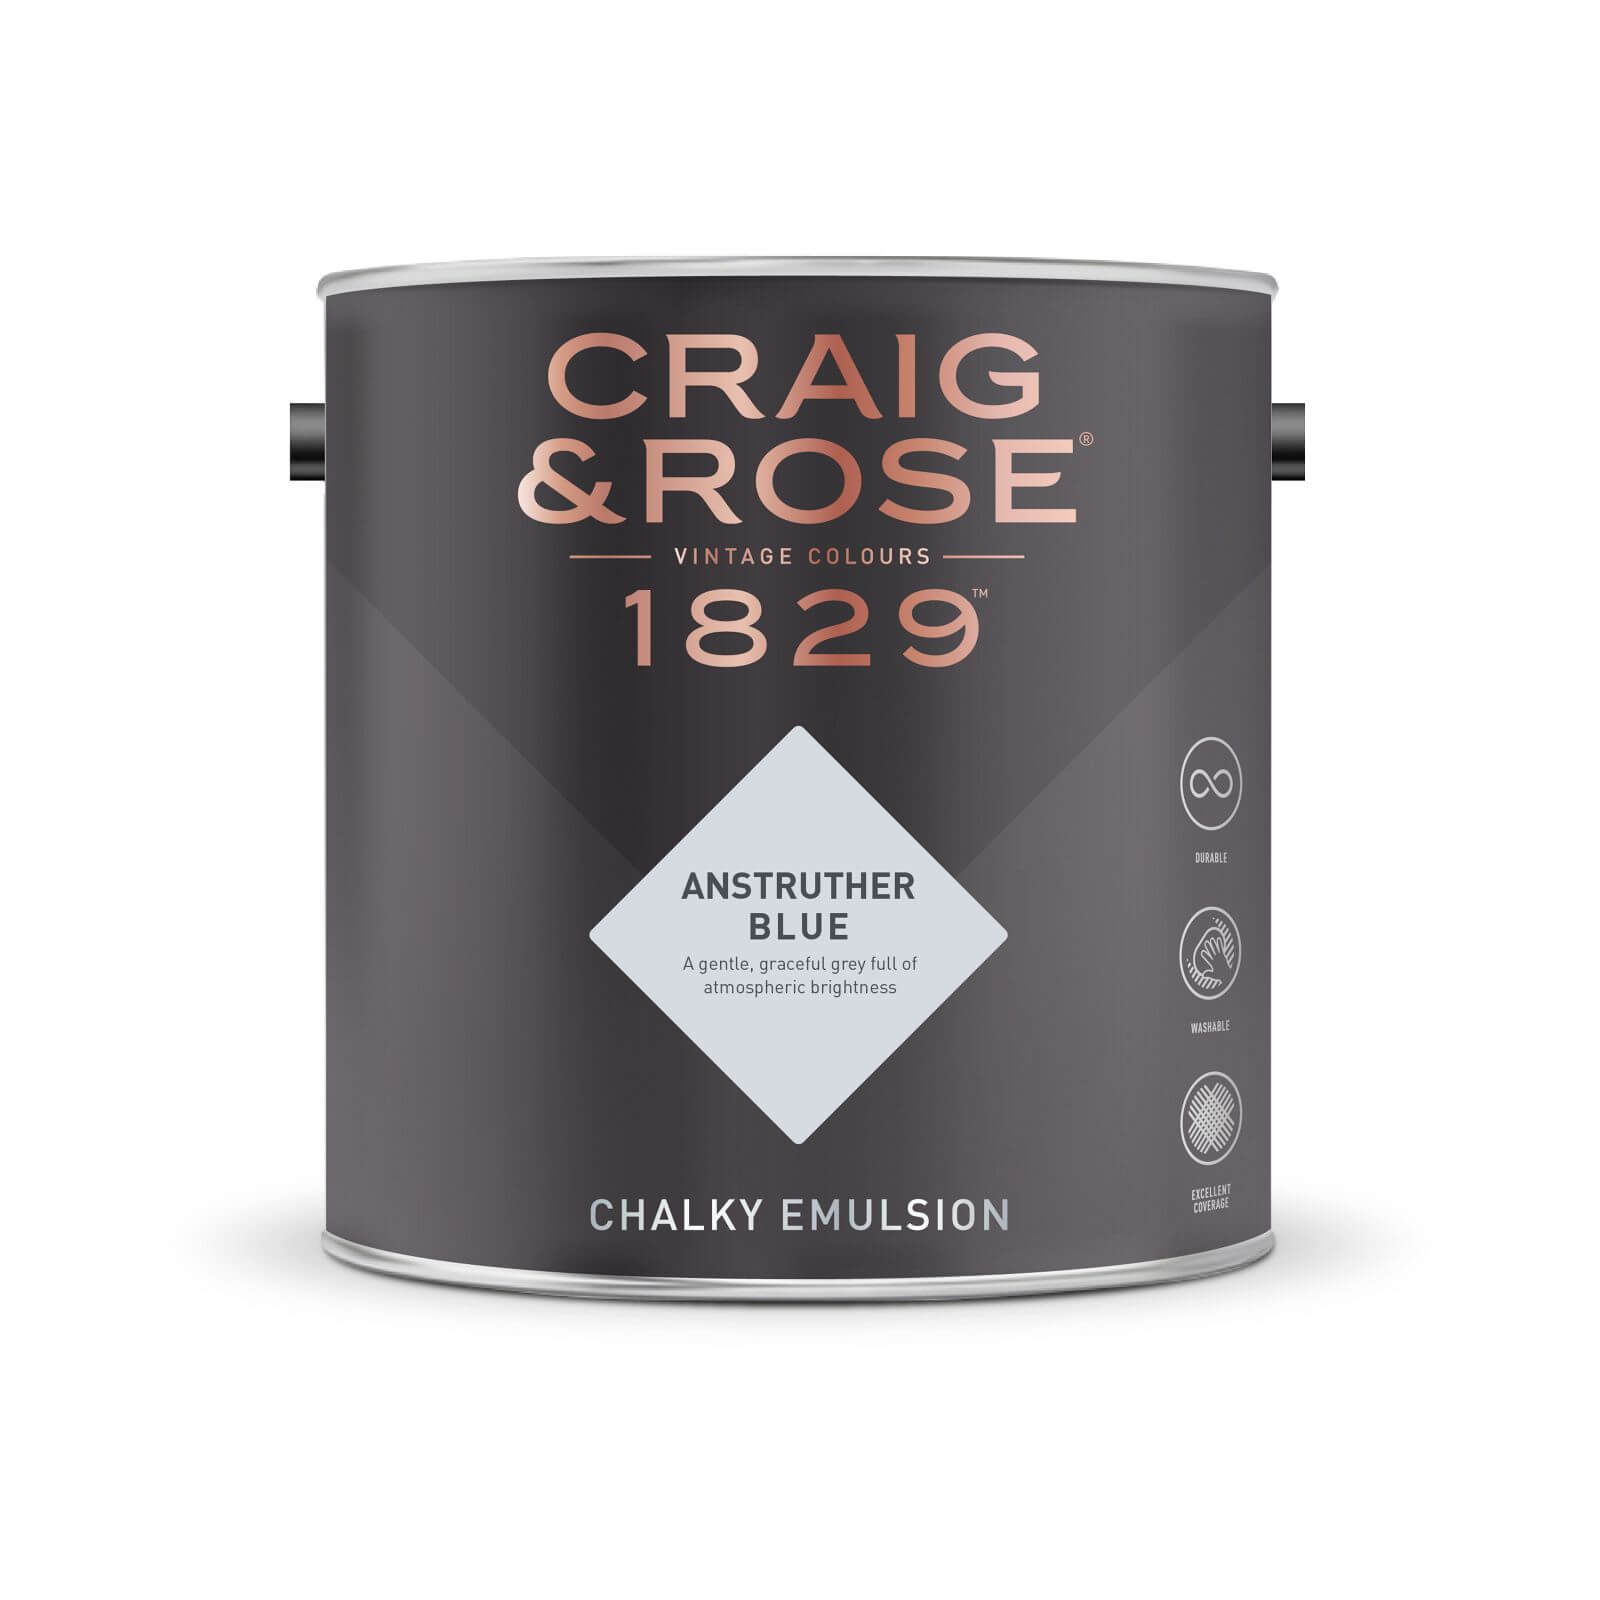 Craig & Rose 1829 Chalky Emulsion Paint Anstruther Blue - 5L